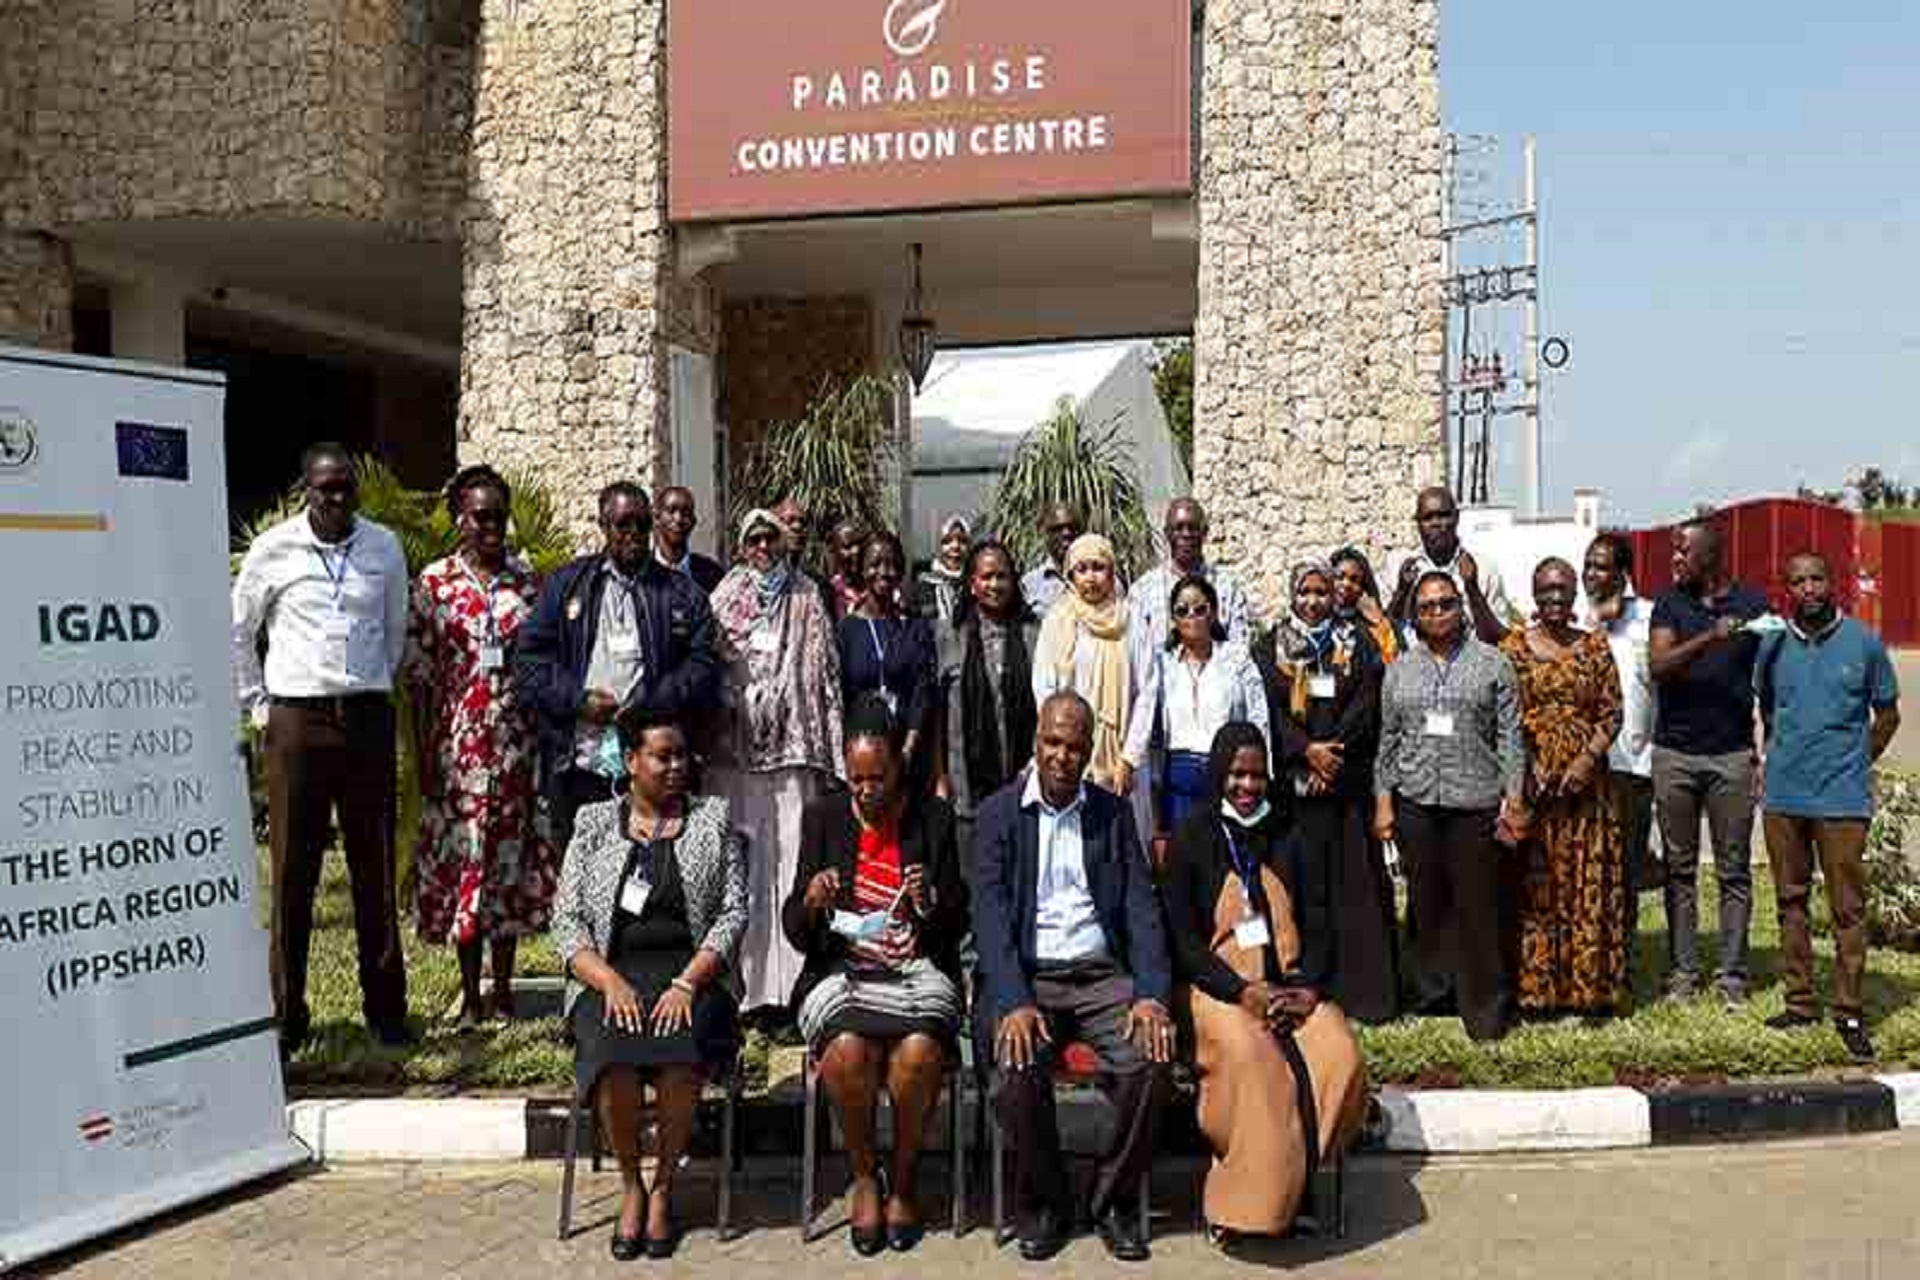 IGAD Security Sector Program (IGAD SSP) Convene National Workshop on Women’s Rights in Counter-Terrorism Policies and Strategies in Mombasa